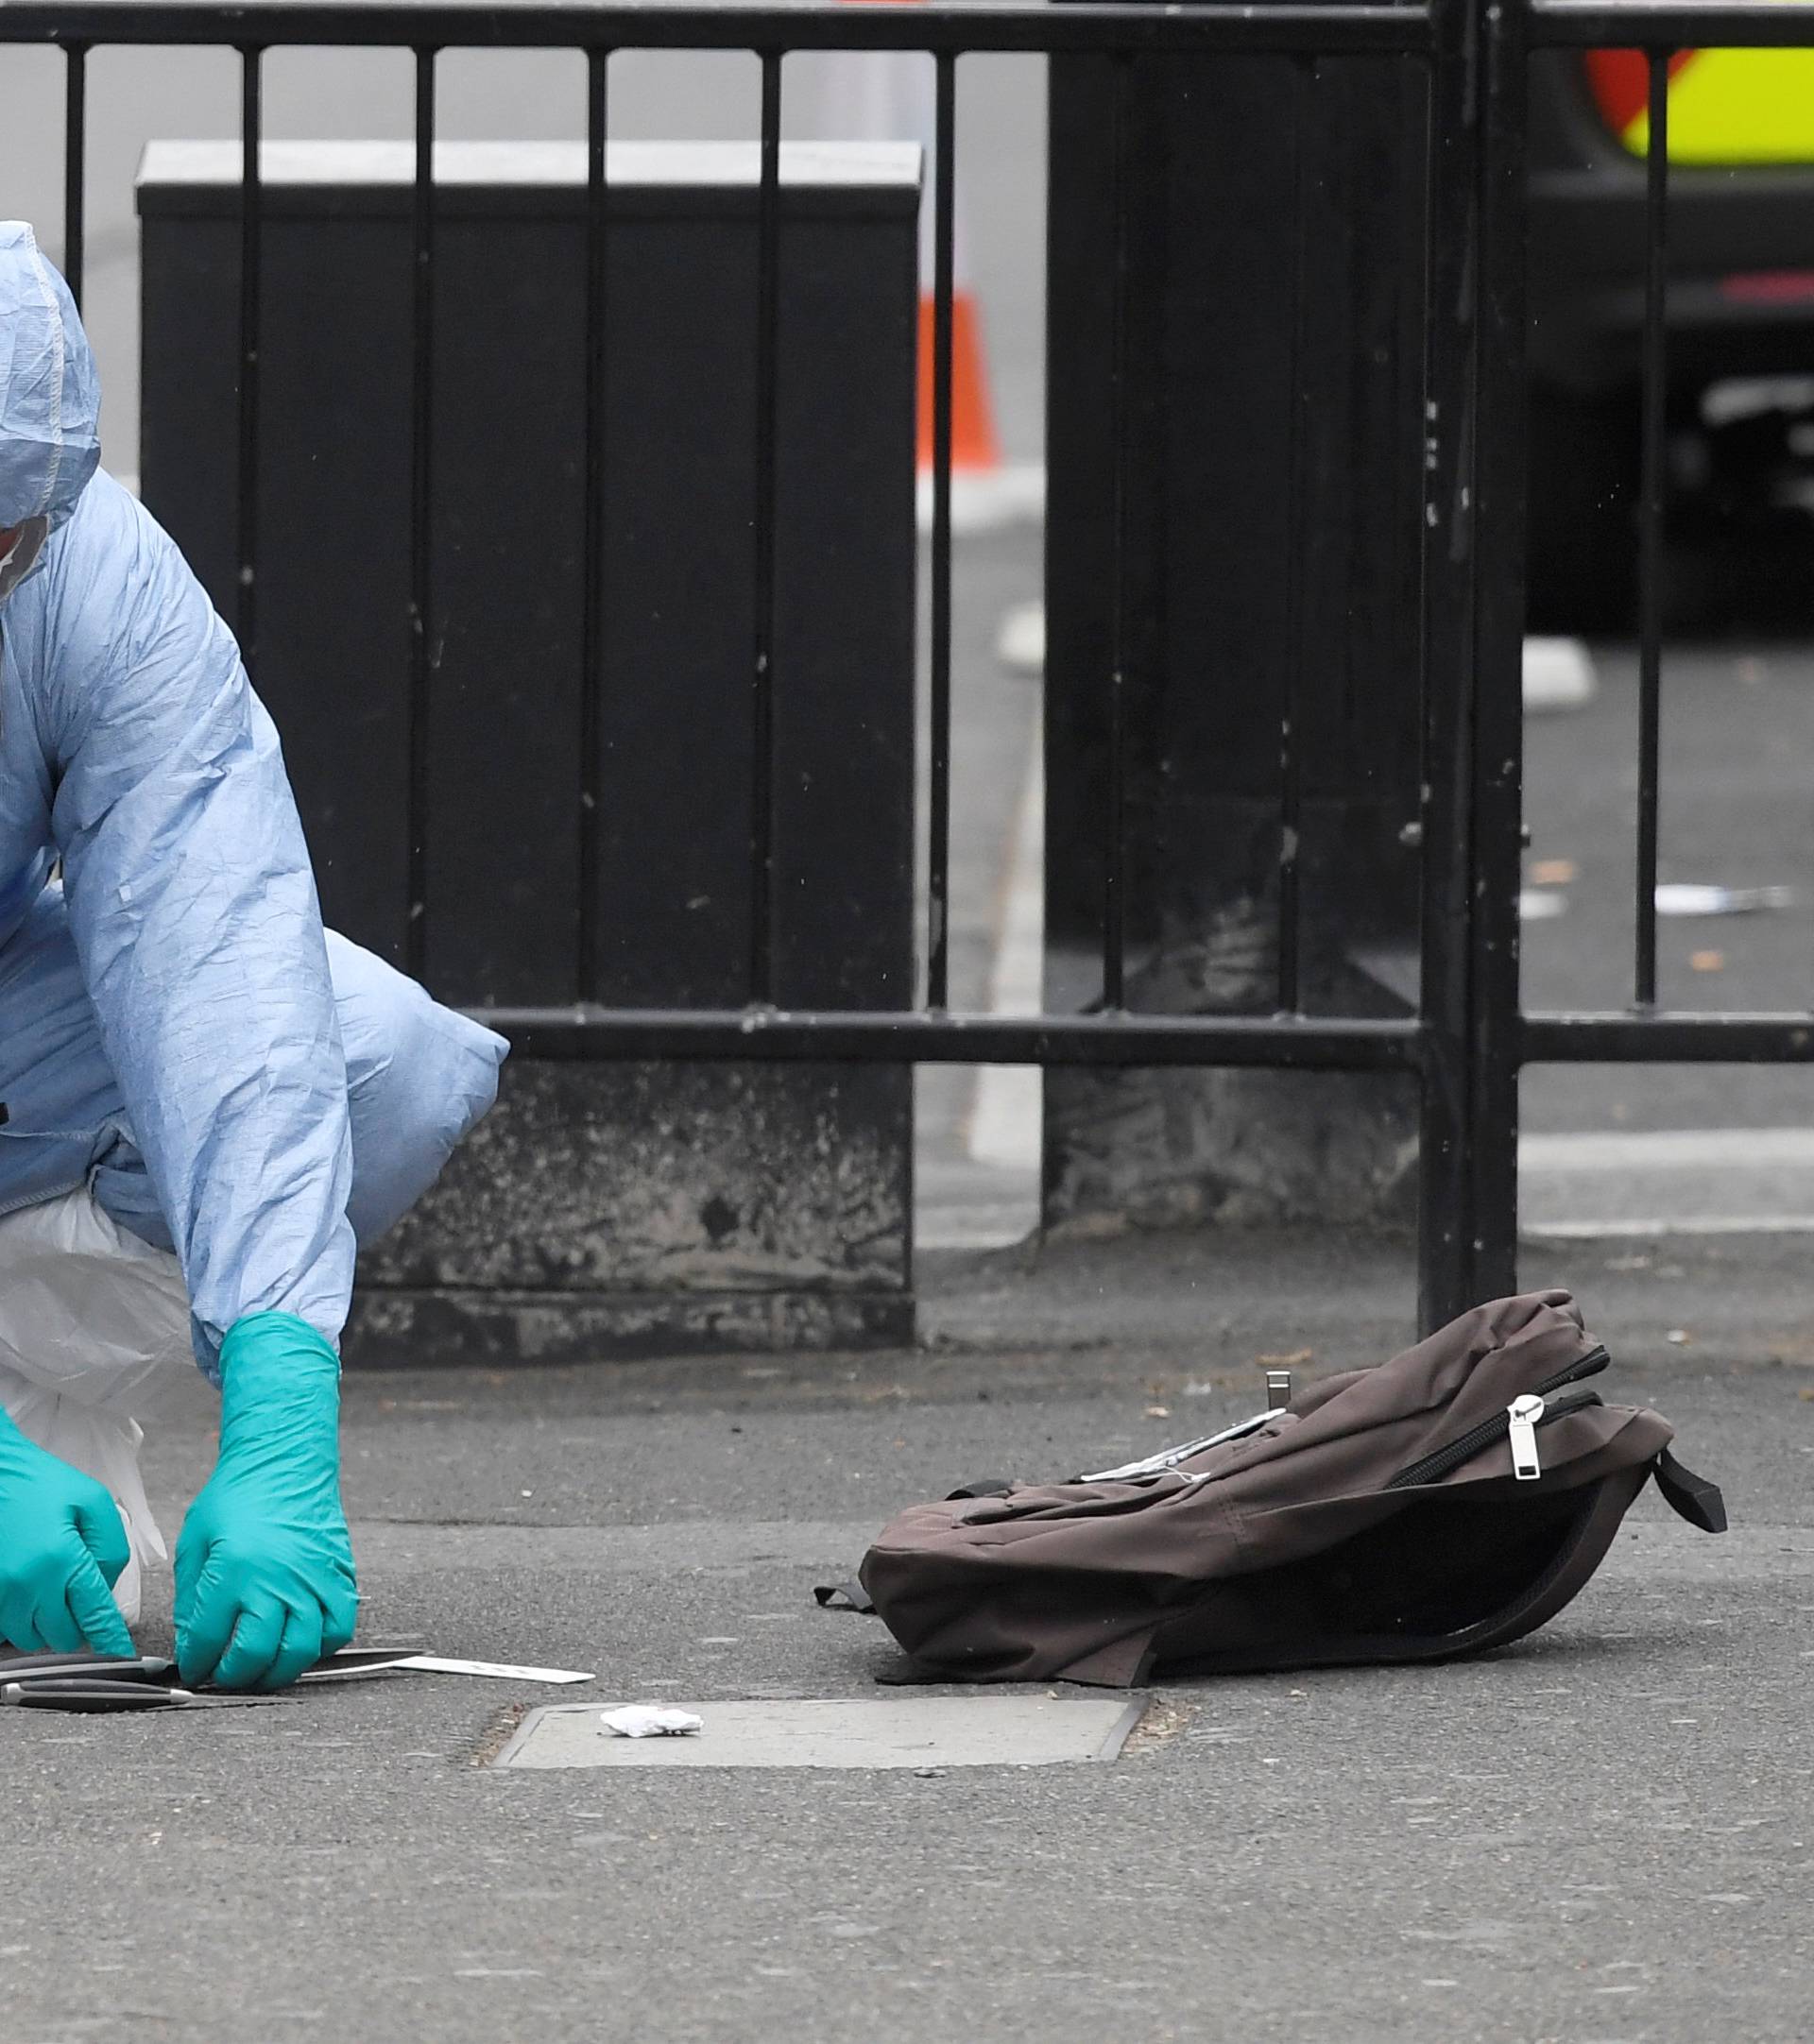 A forensic investigator recovers knives after man was arrested on Whitehall in Westminster, central London